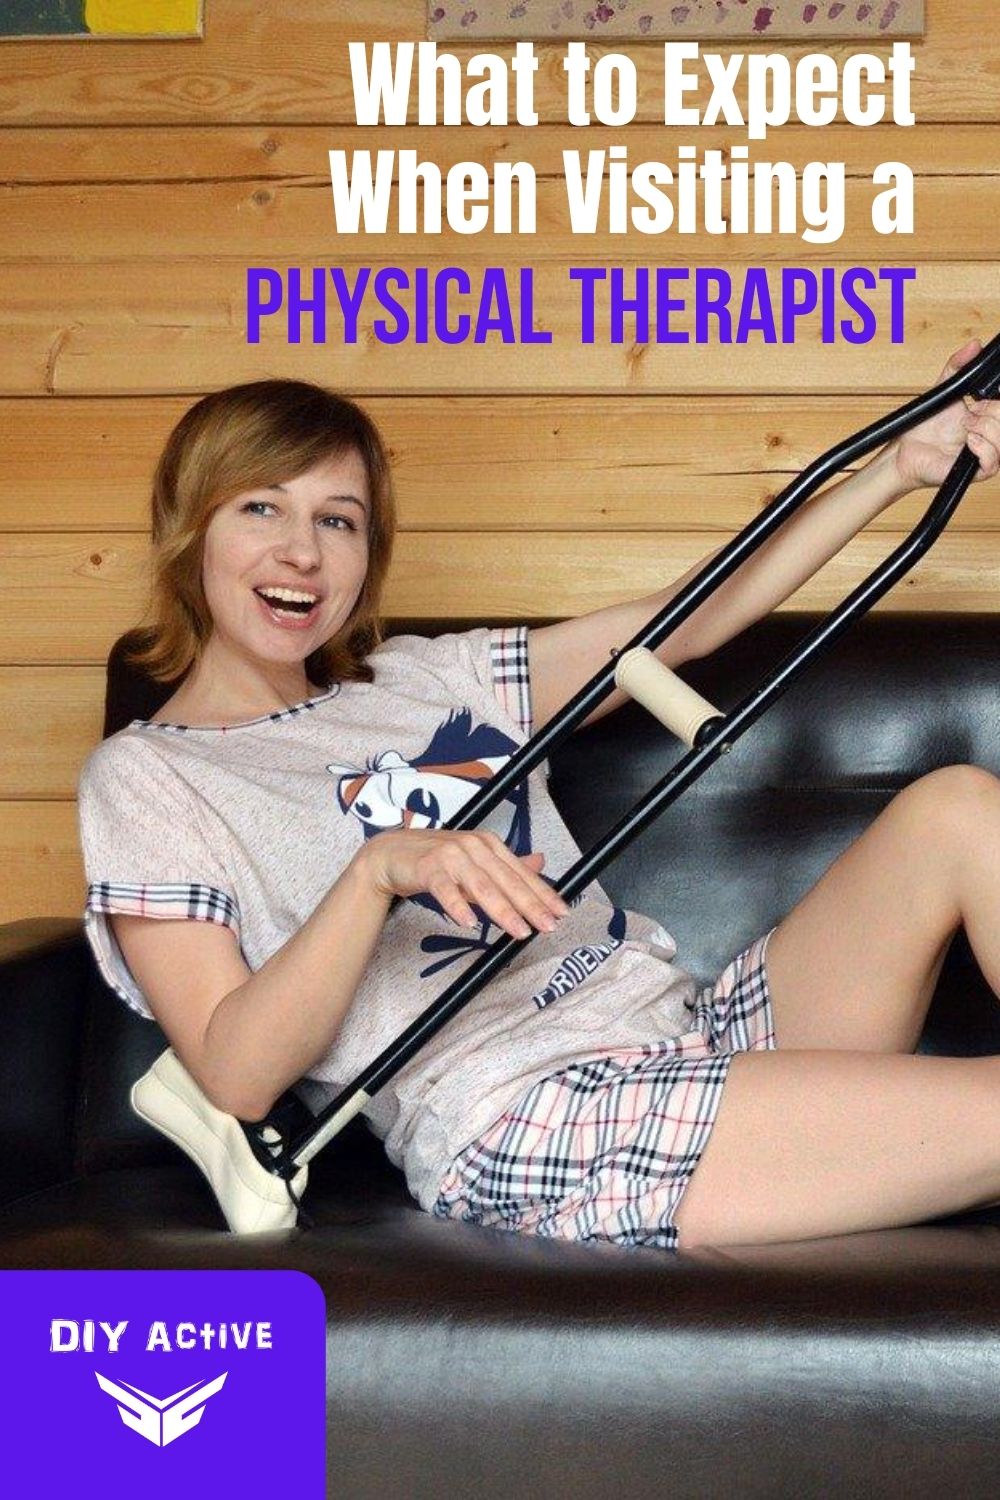 What to Expect When Visiting a Physical Therapist